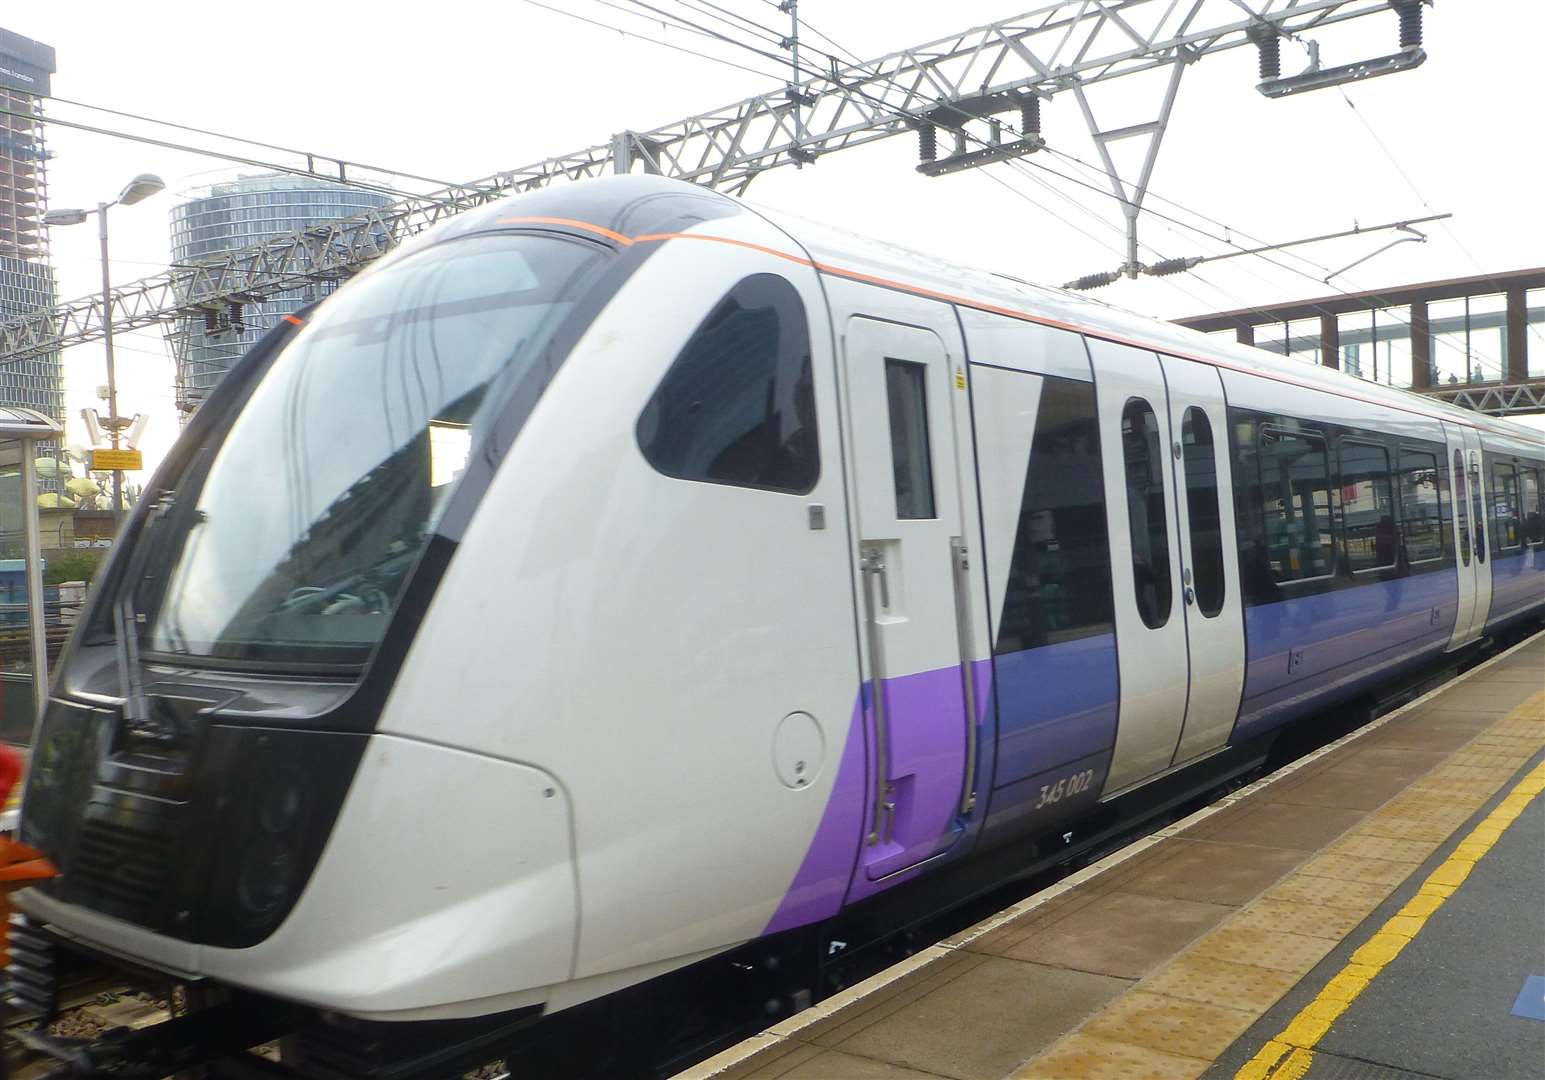 It is proposed to extend Crossrail from its currently terminus at Abbey Wood to Ebbsfleet.